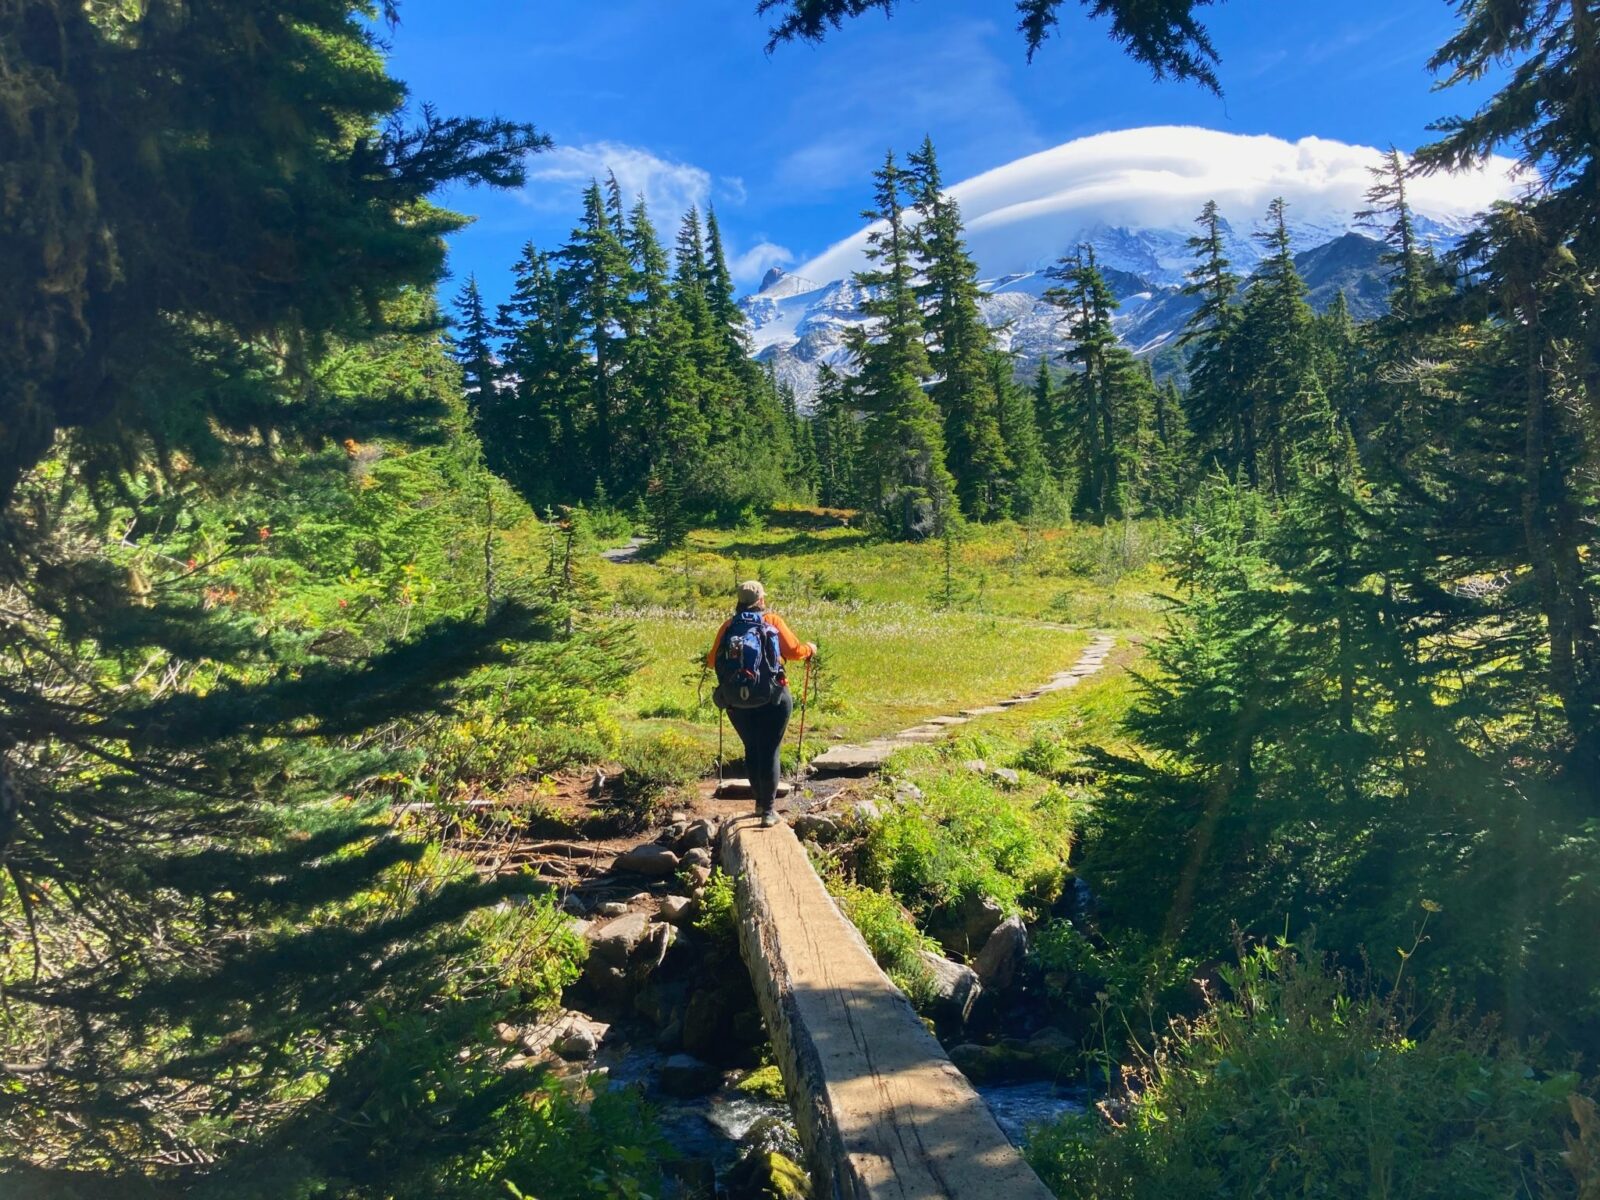 A person with a backpack and hiking poles walking off a log bridge and onto a trail through a wildflower meadow in Spray Park. There are evergreen trees surrounding the meadow and Mt Rainier in the distance has clouds around it's summit.